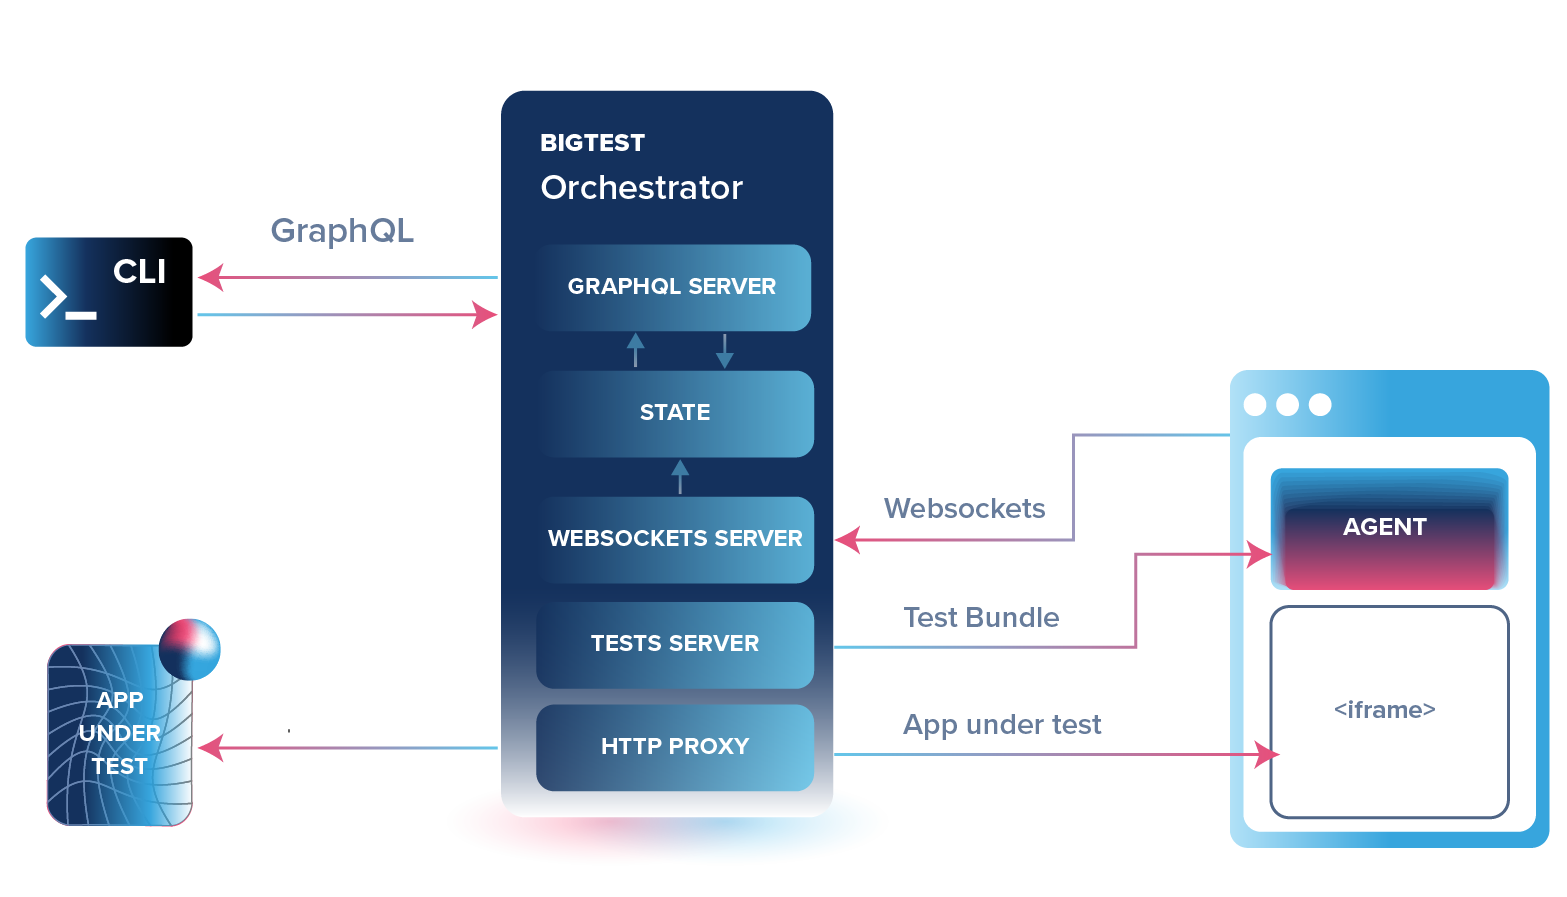 Diagram describing Bigtest&#39;s orchestrator and how it communicates with the agent and the CLI through GraphQL